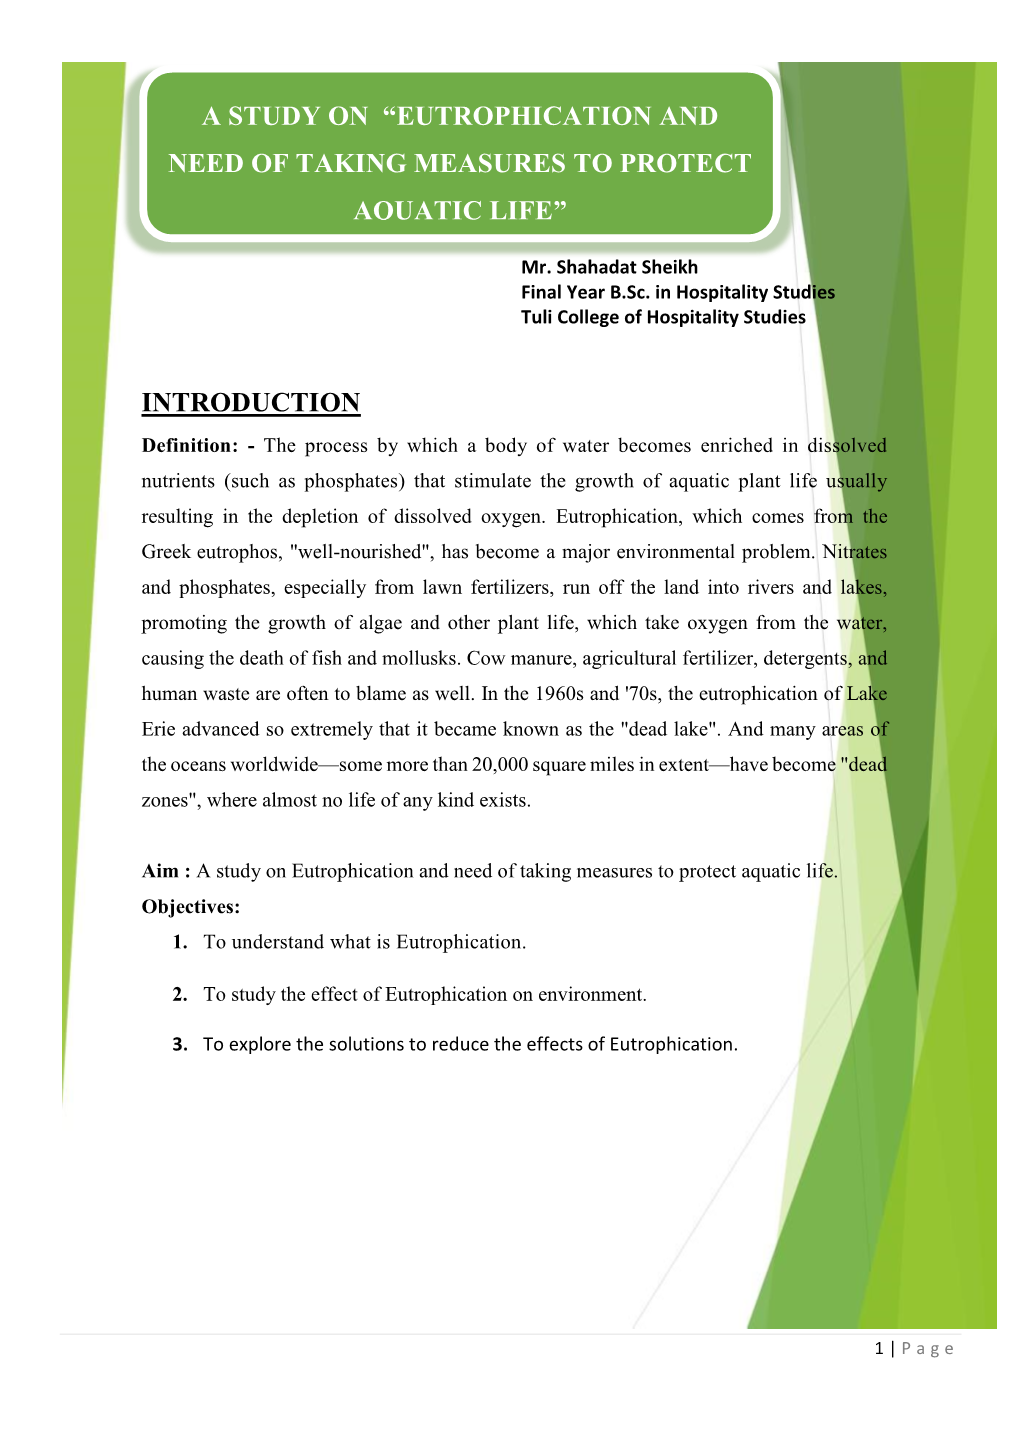 Introduction a Study on “Eutrophication and Need of Taking Measures to Protect Aquatic Life”